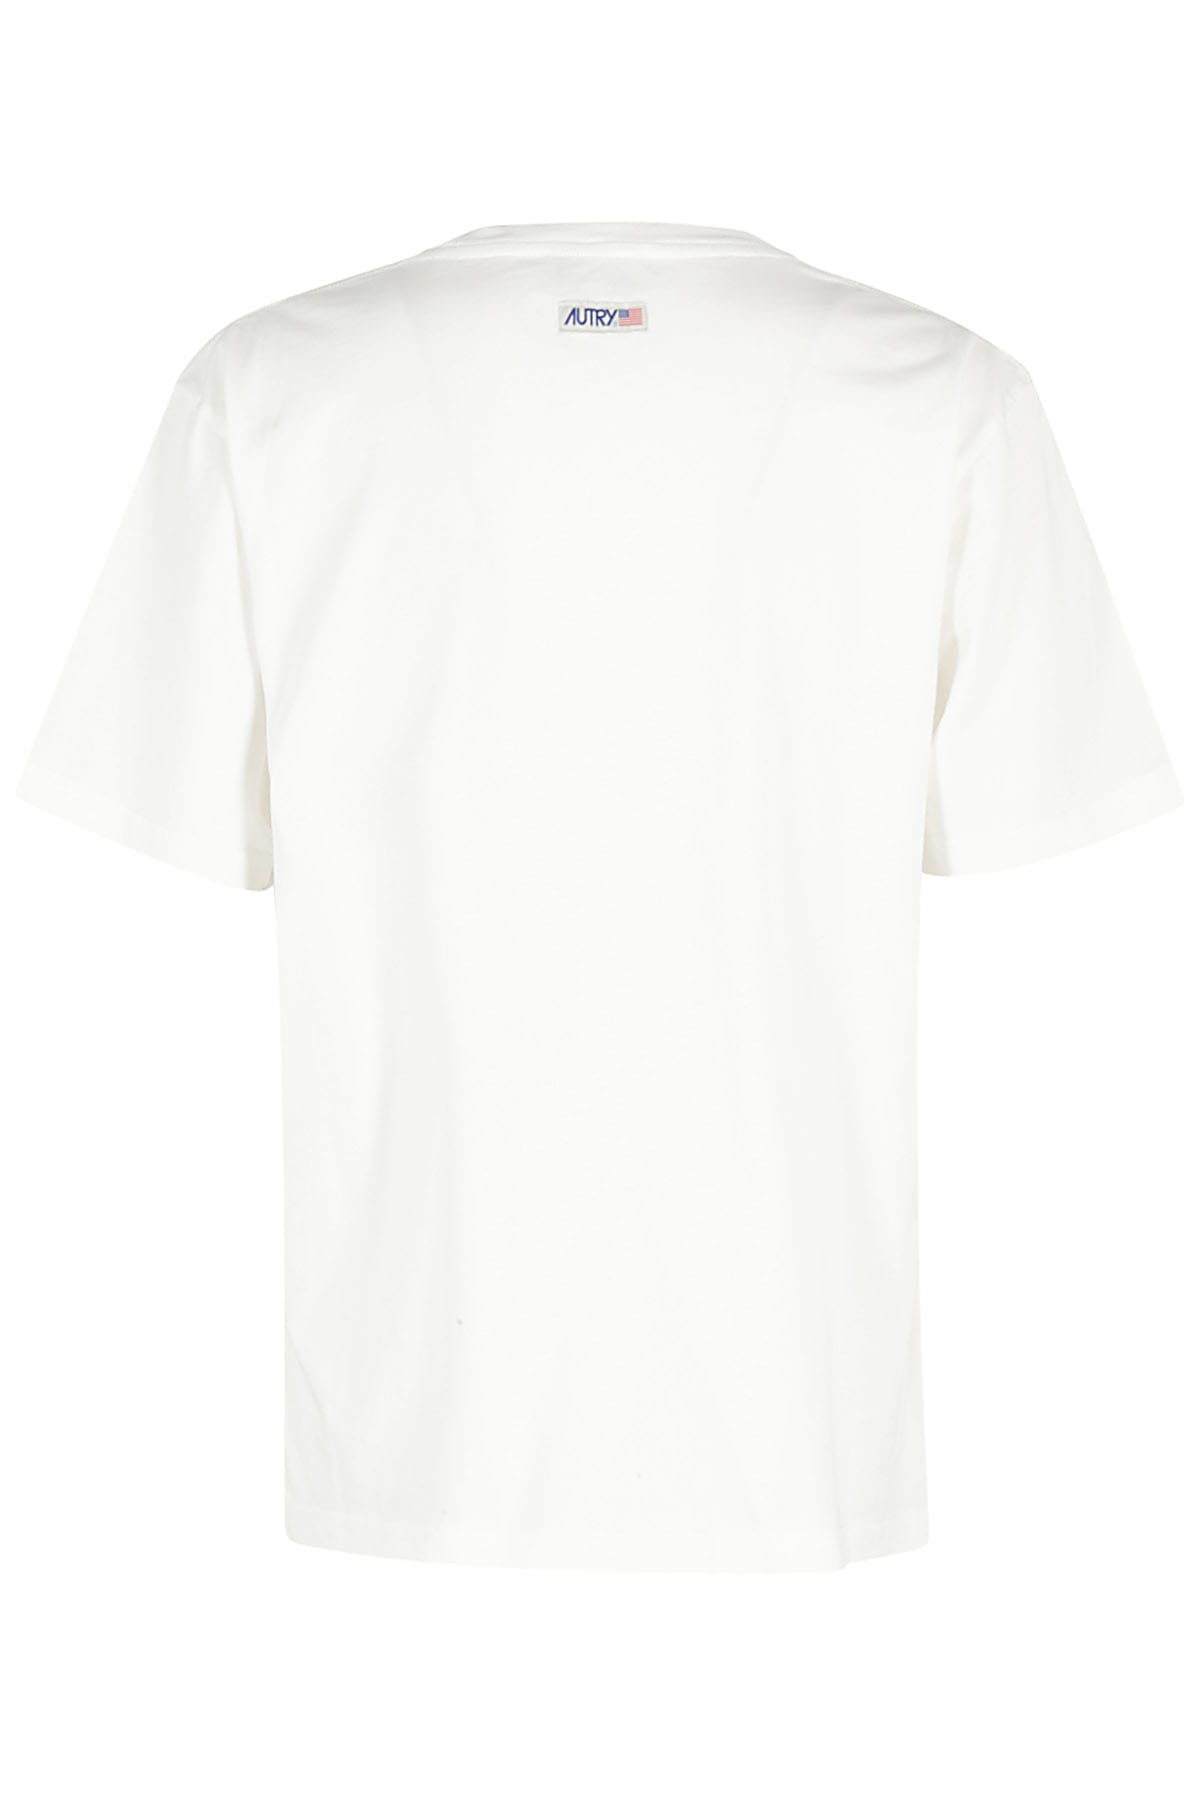 Shop Autry T Shirt Main Wom In Cw Cotton White